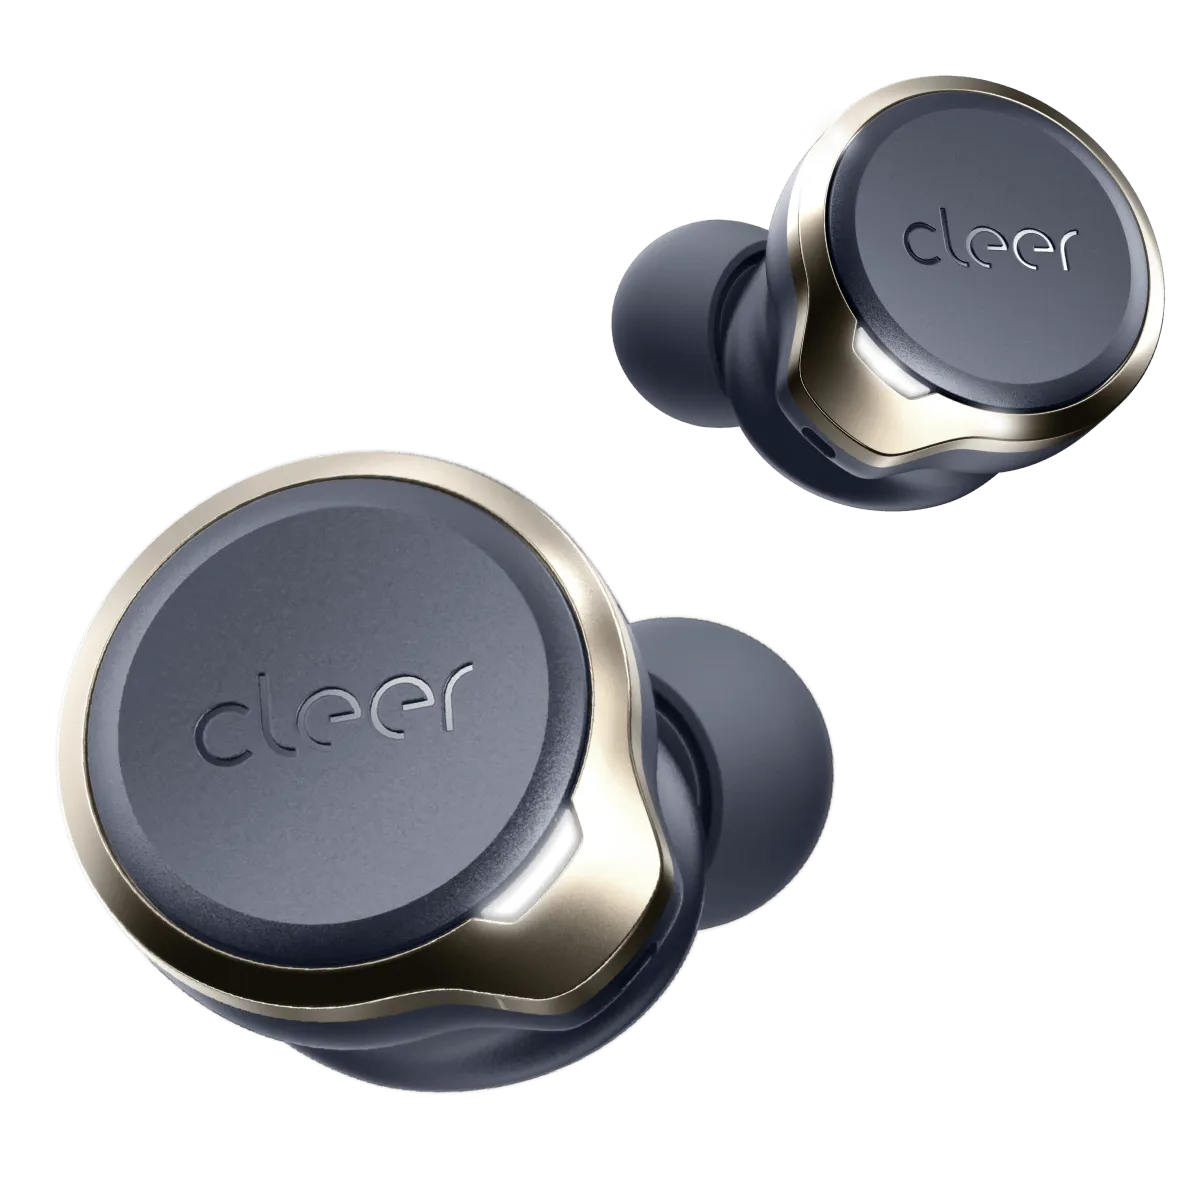 ALLY PLUS - True Wireless Noise Cancelling Earbuds | Cleer Audio